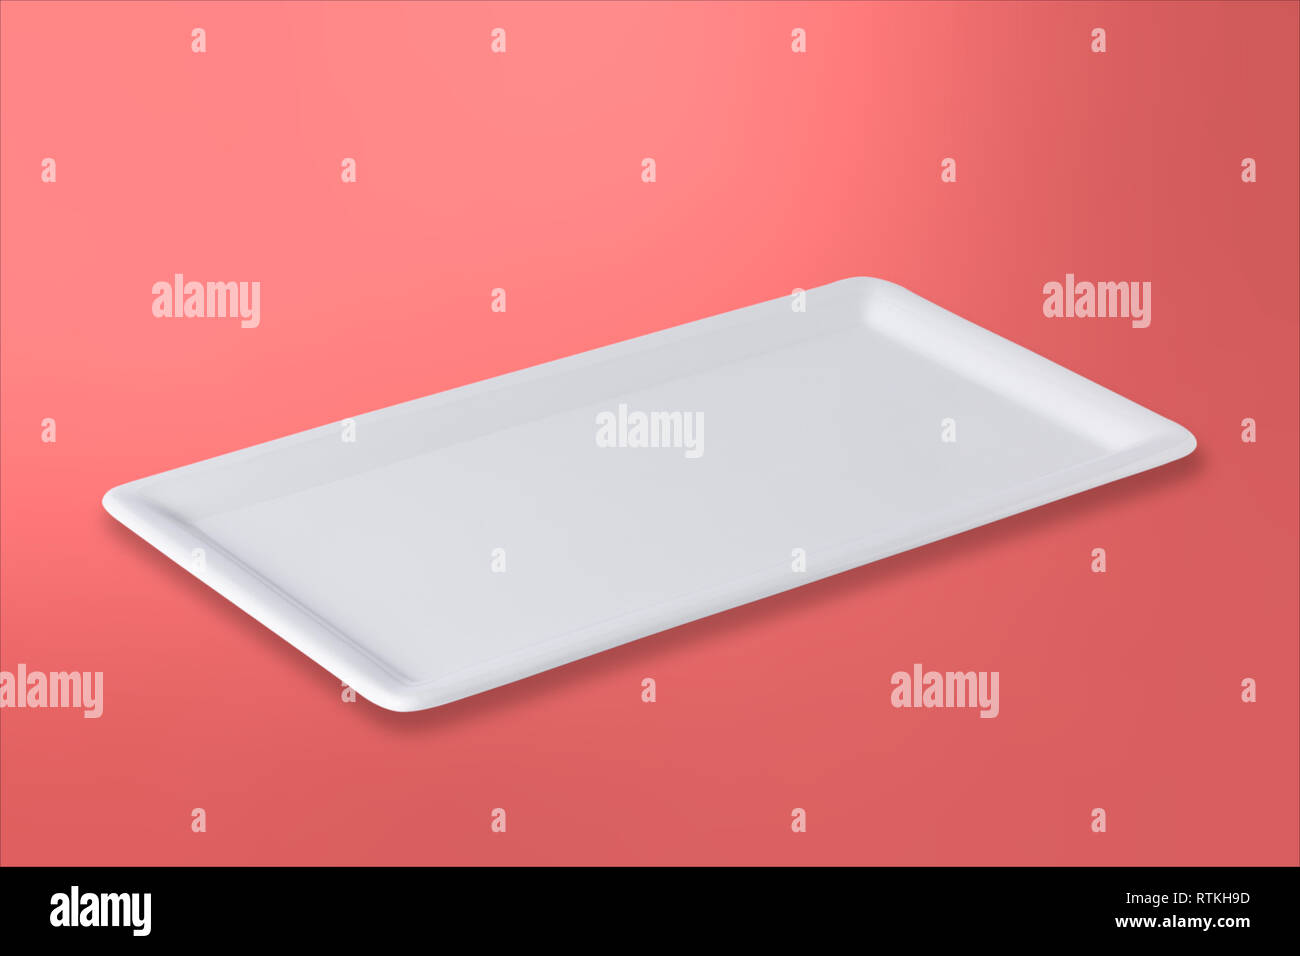 Empty white cornered plate on gradient red rose background, front view, oblique position Stock Photo